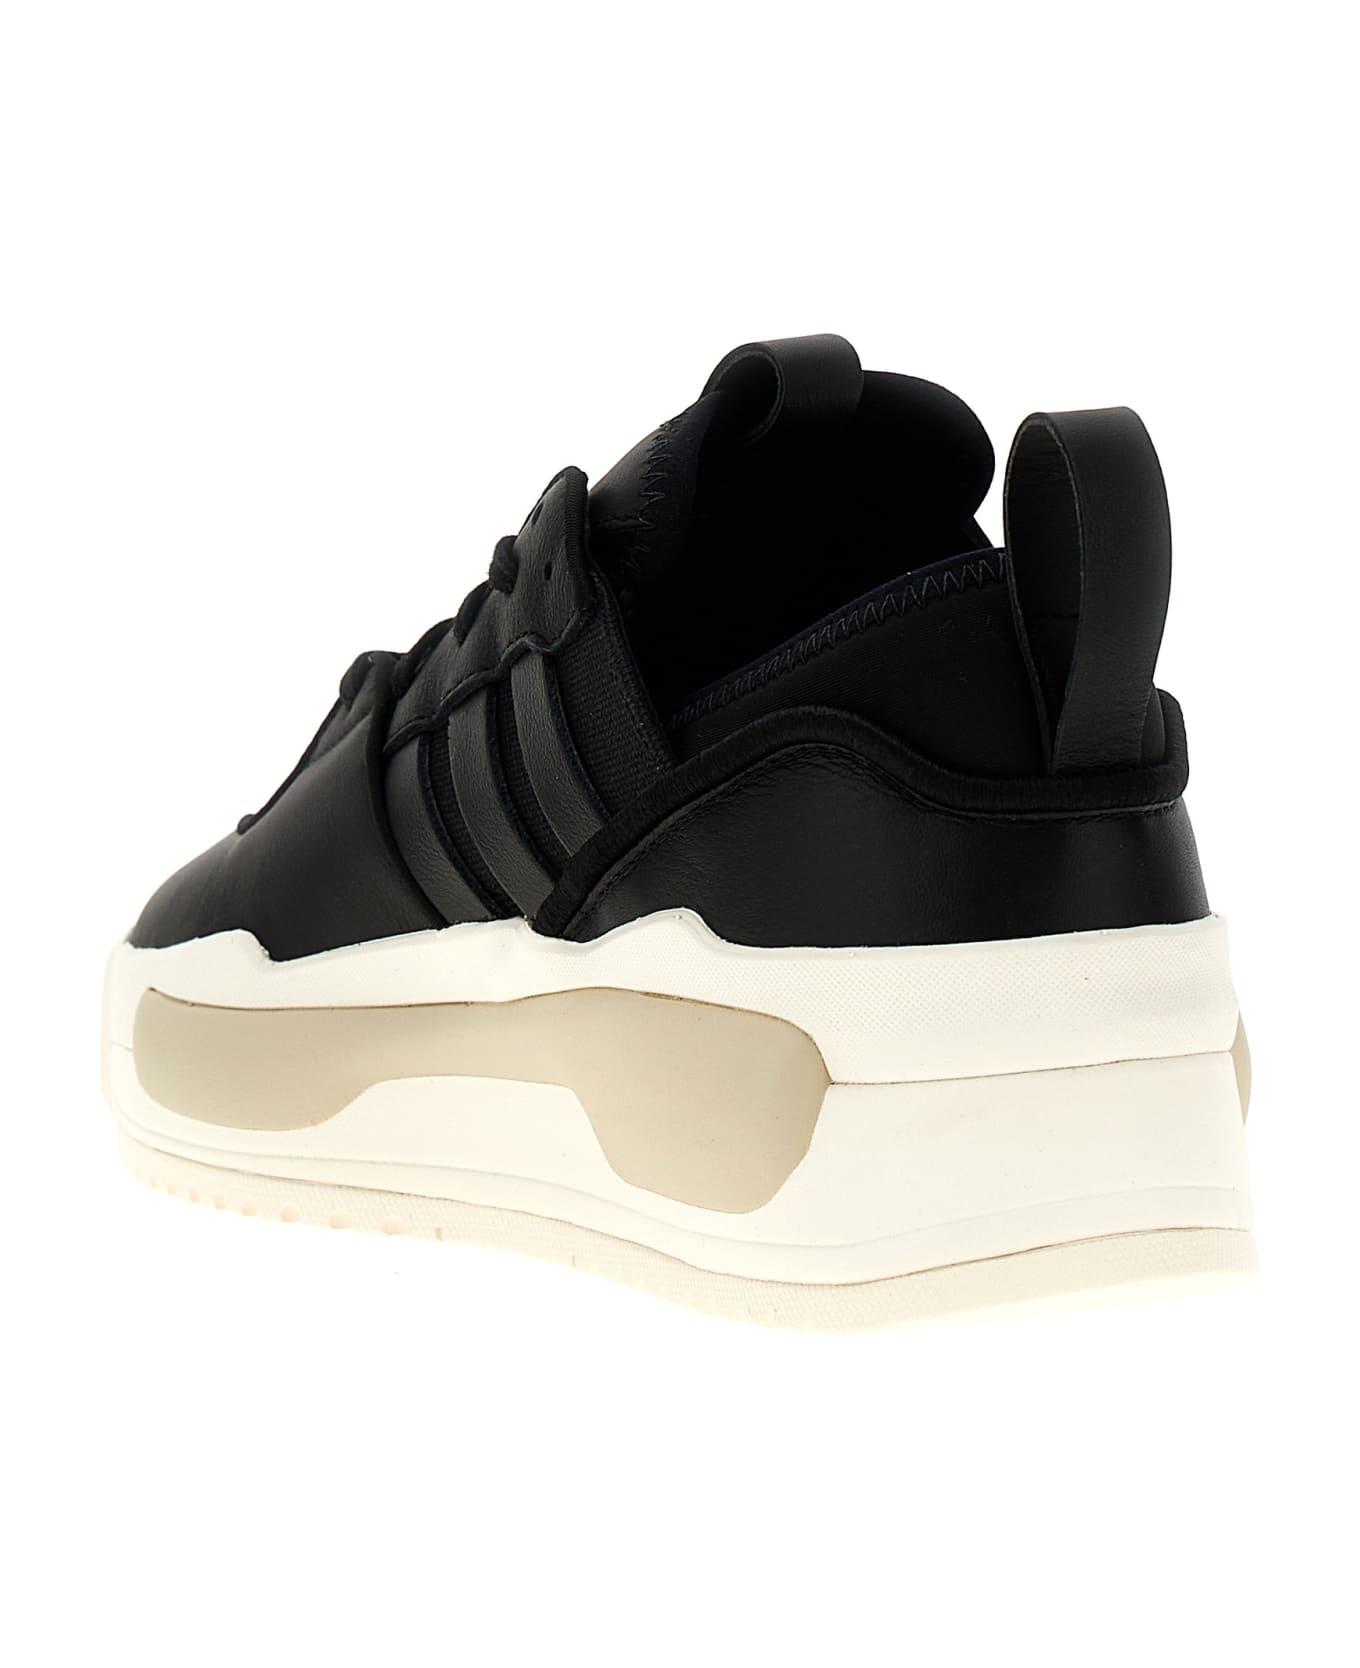 Y-3 'rivalry' Sneakers - White/Black スニーカー